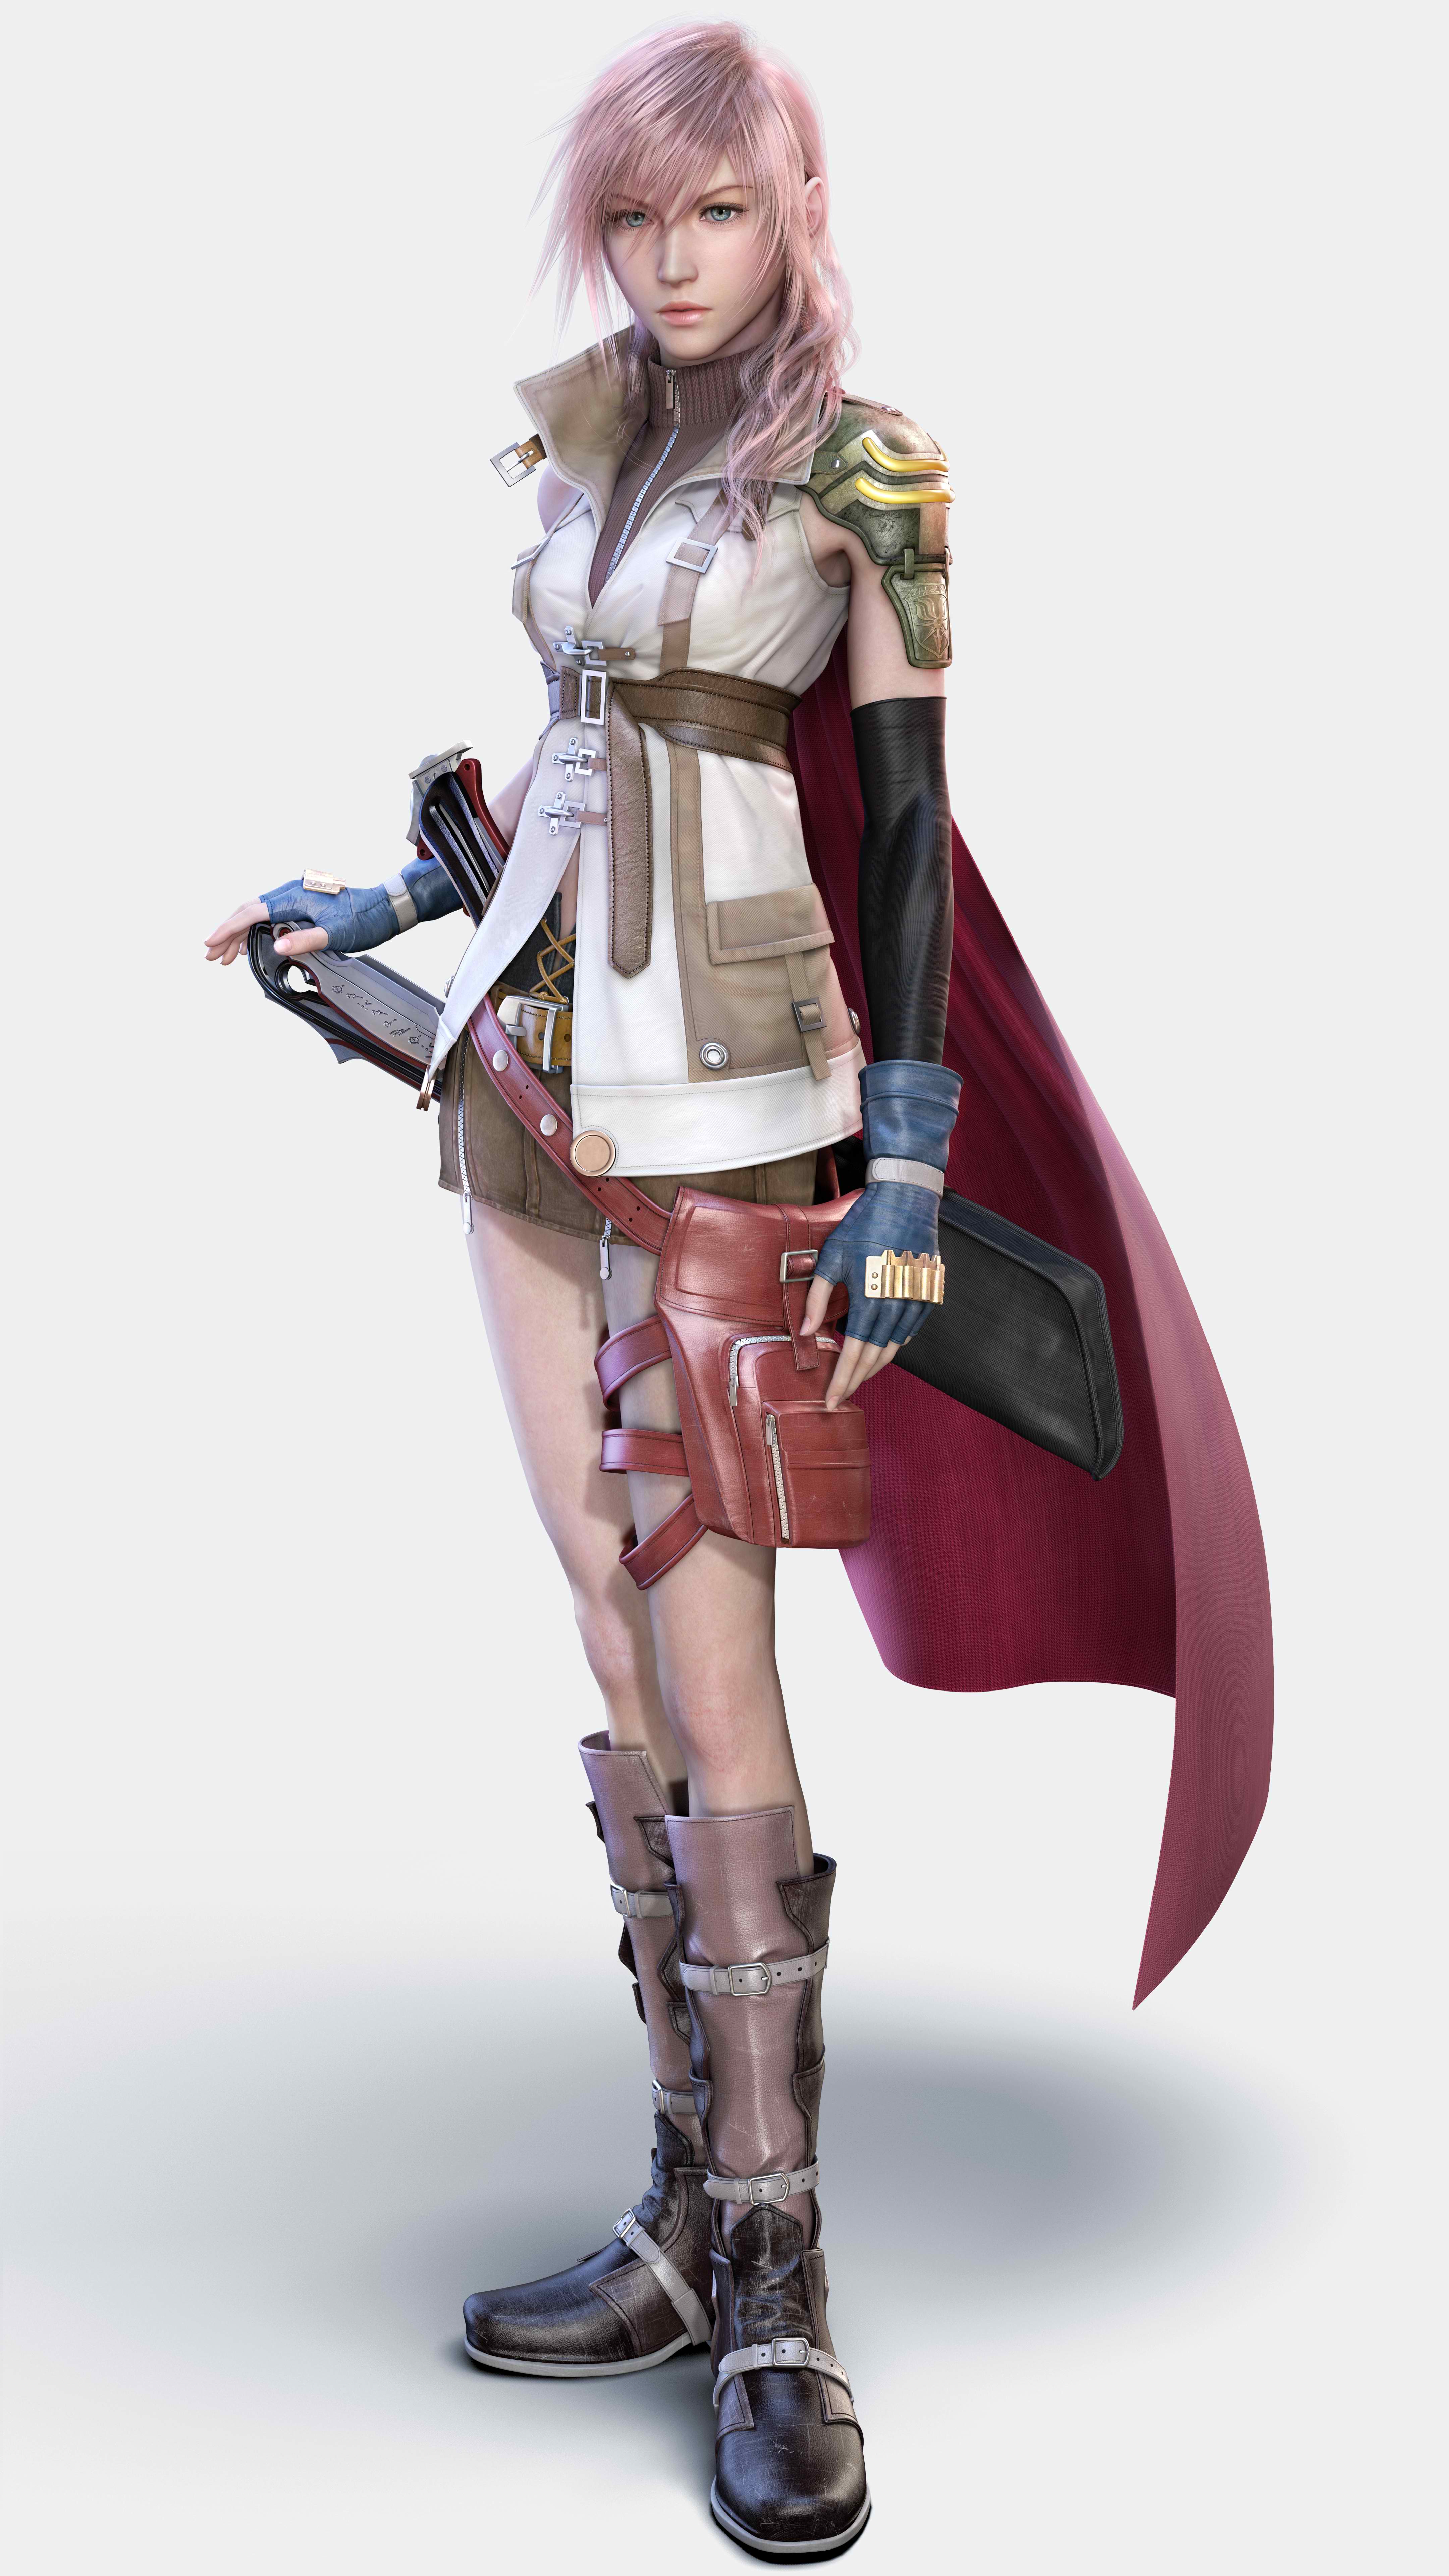 General 4320x7680 Final Fantasy XIII Claire Farron portrait display video games gloves fingerless gloves simple background white background minimalism video game girls video game characters